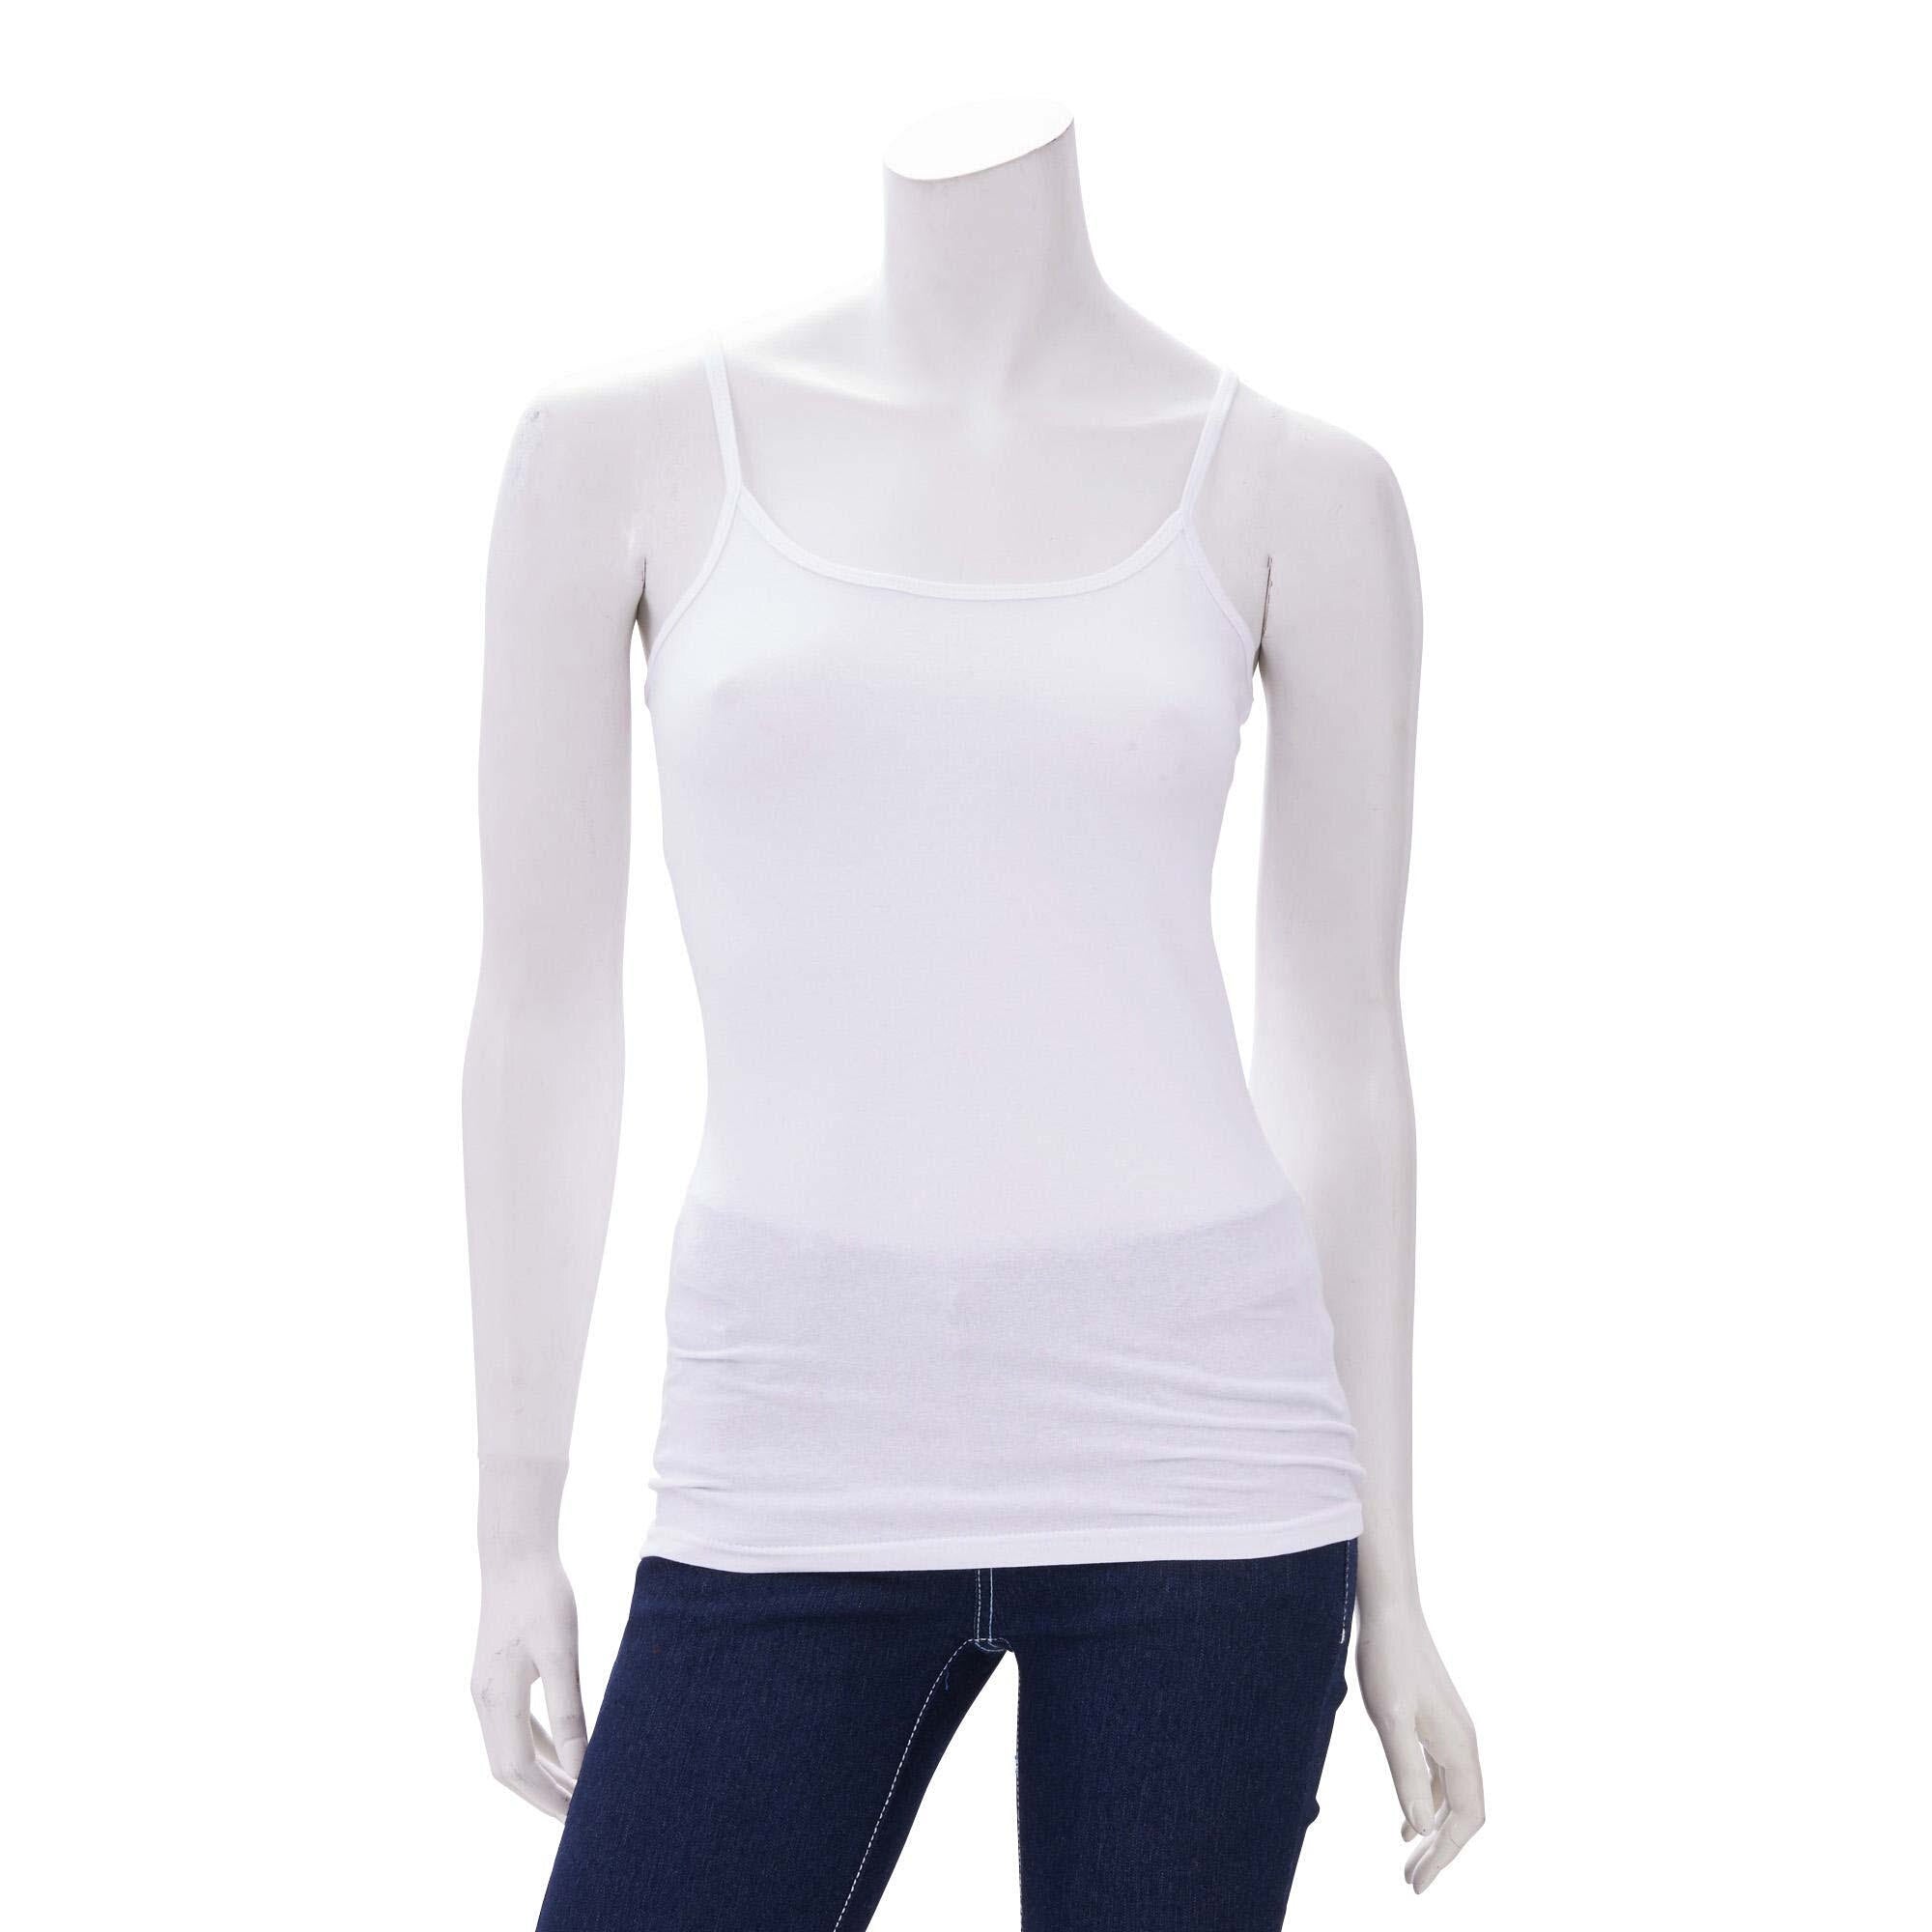 Natural Uniforms Womens Adjustable Strap camisole tank top 